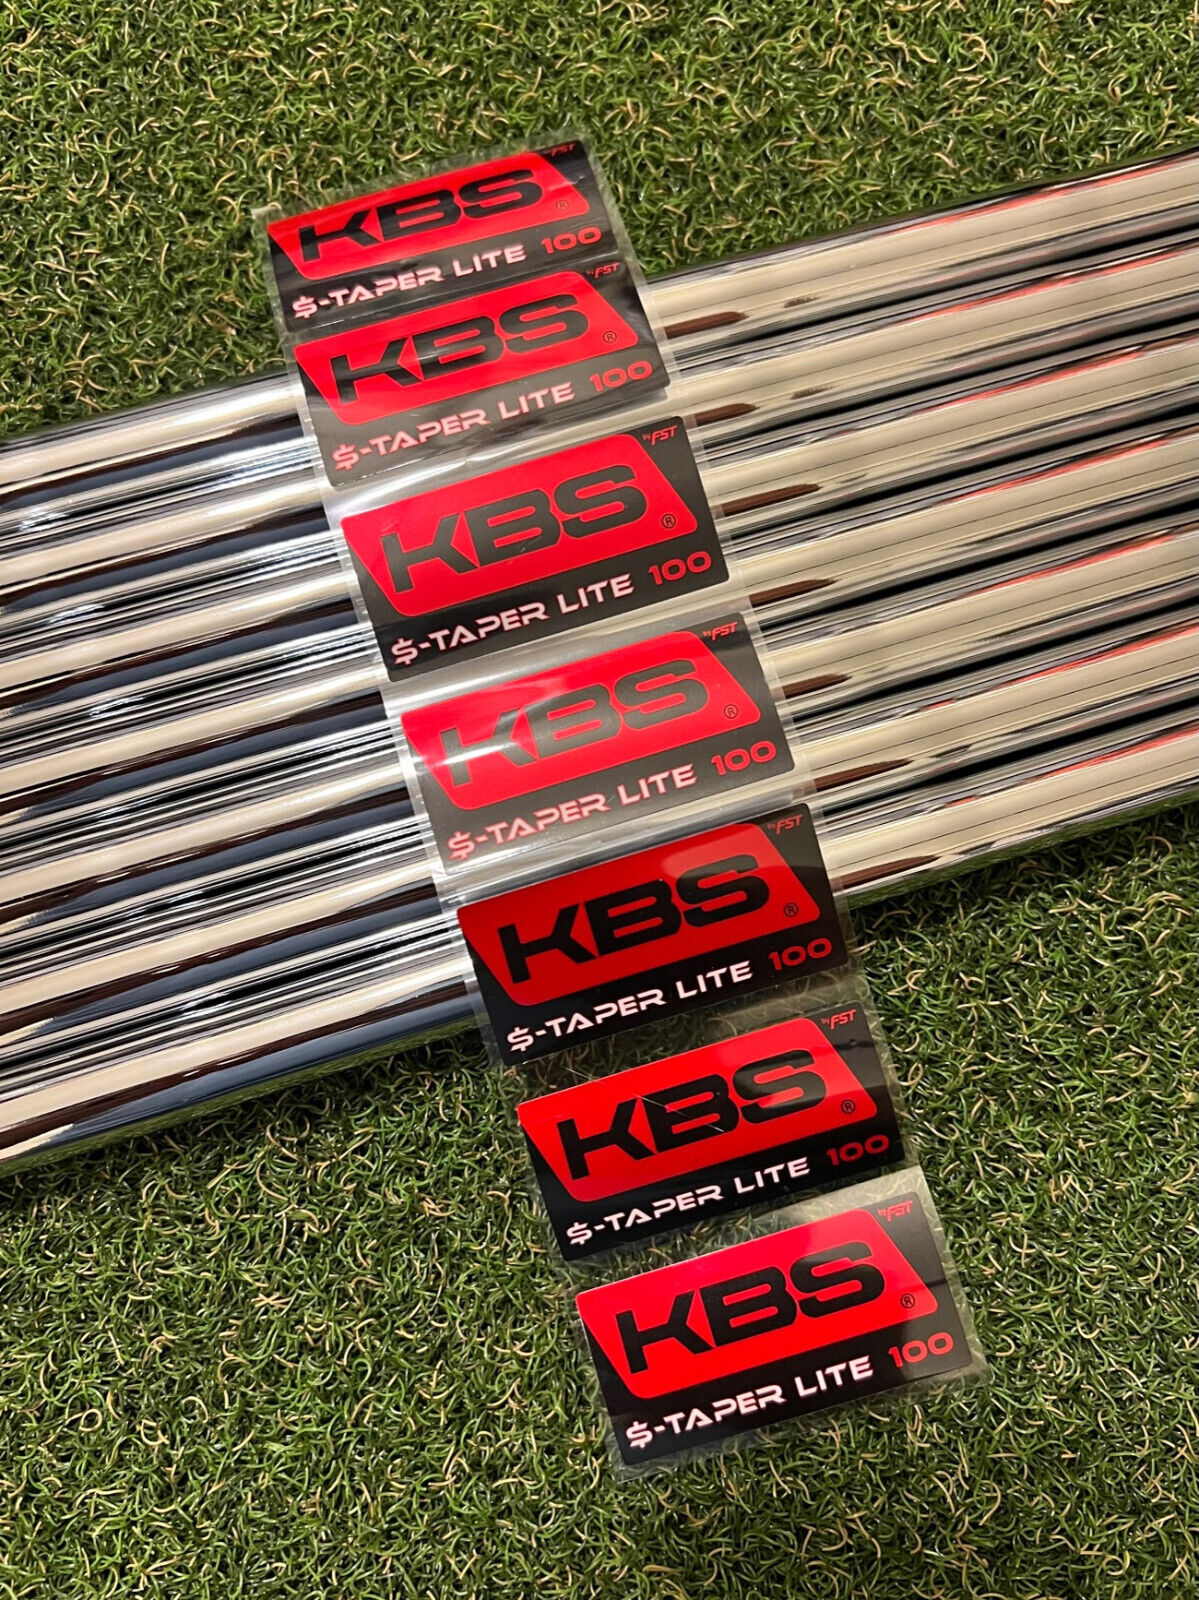 KBS $-Taper Lite Chrome .370" Parallel Iron Shaft - The Golf Club Trader